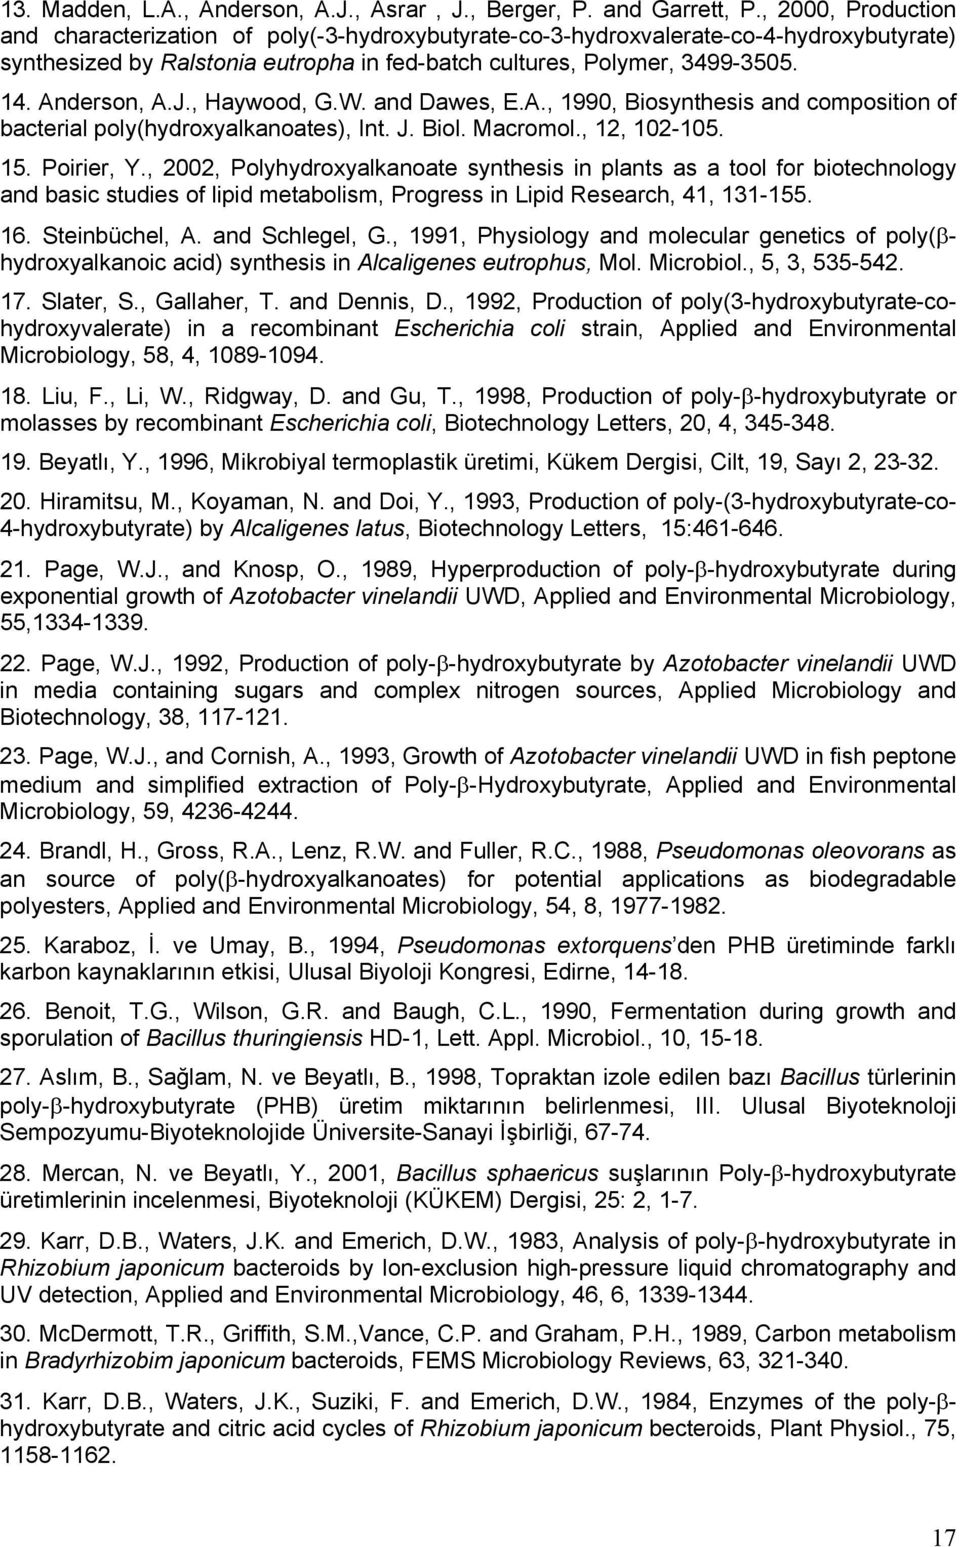 Anderson, A.J., Haywood, G.W. and Dawes, E.A., 1990, Biosynthesis and composition of bacterial poly(hydroxyalkanoates), Int. J. Biol. Macromol., 12, 102-105. 15. Poirier, Y.